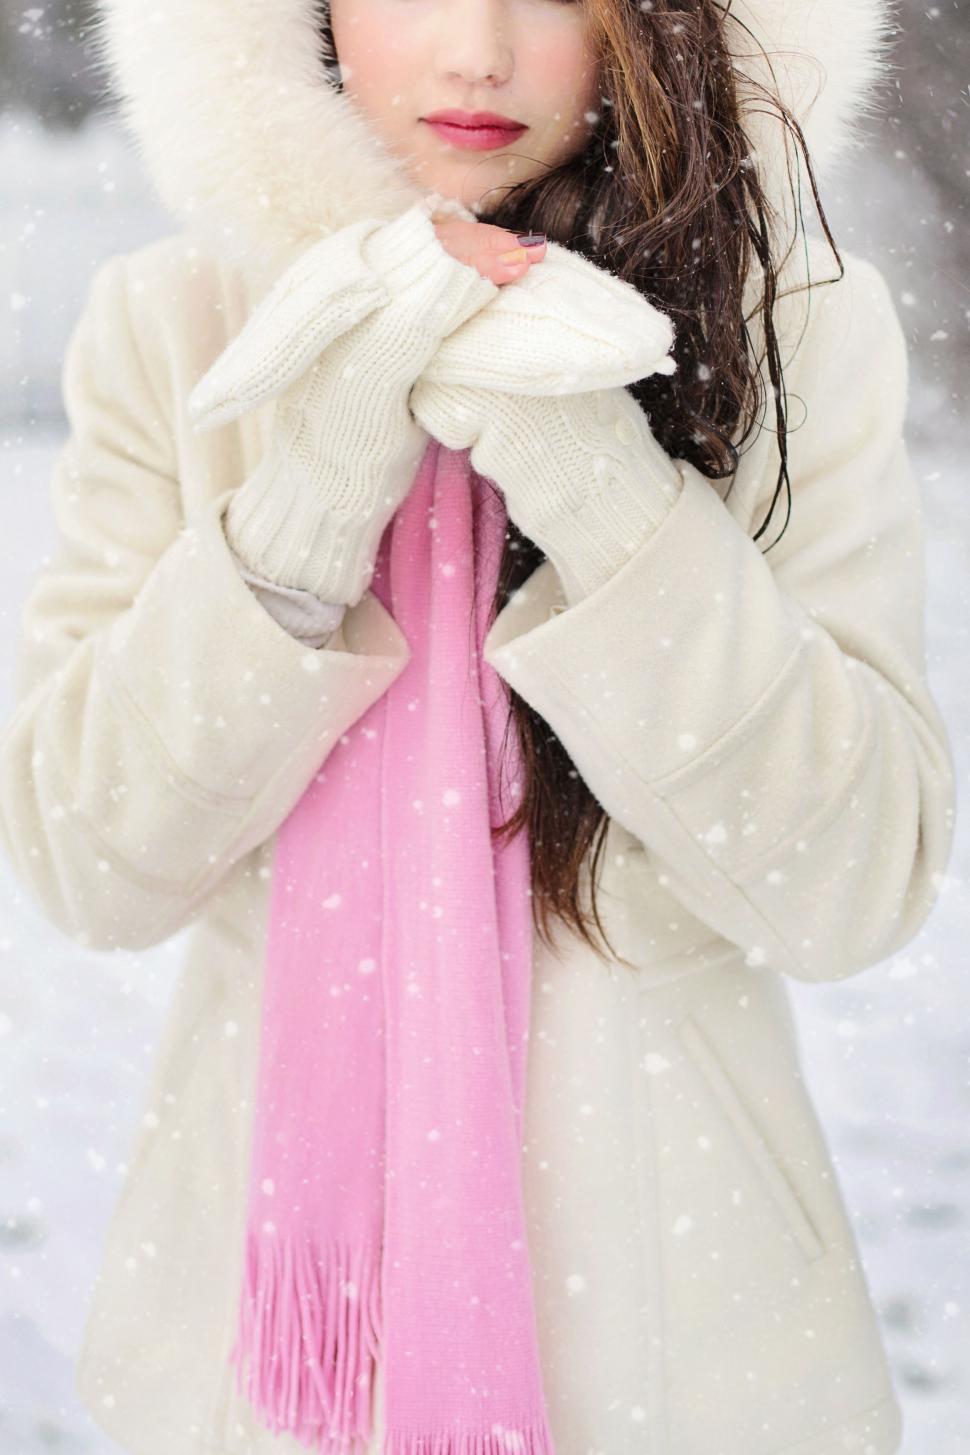 Free Image of Woman in white winter jacket in snow 